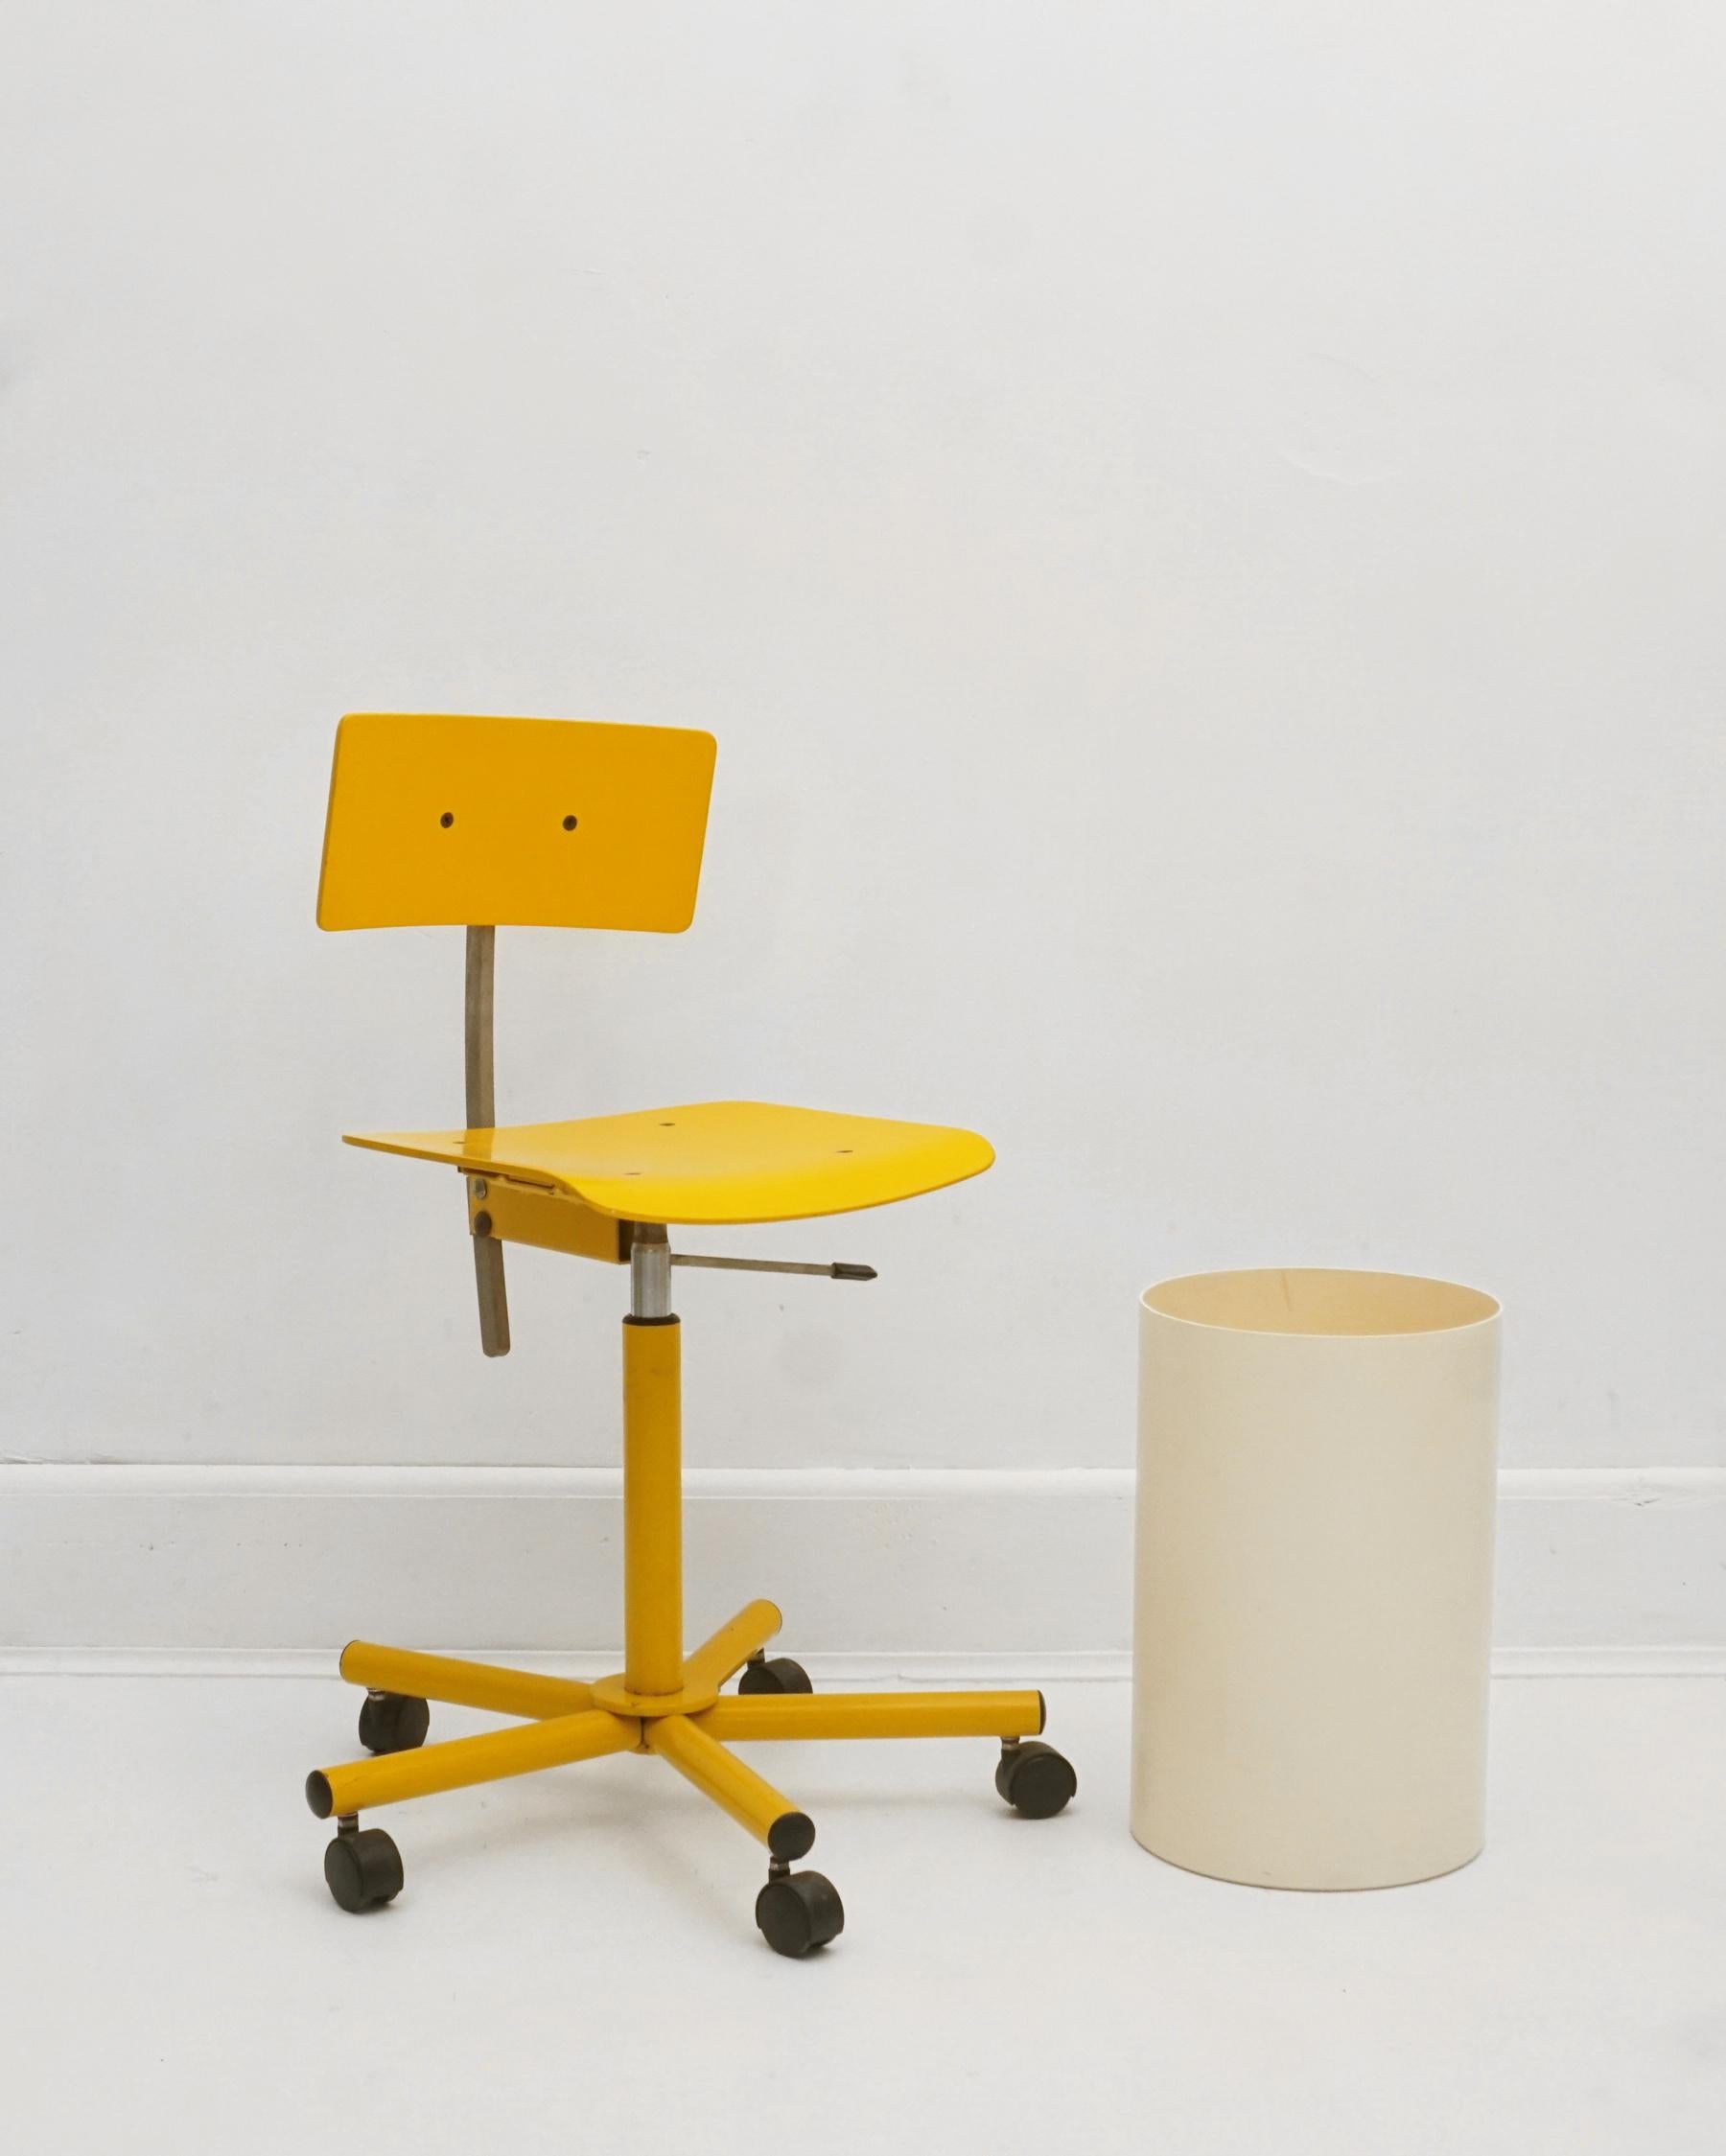 1980s Teen desk chair designed by Anna Anselmi for Beiffeplast, made in Padova, Italy. The adjustable chair, especially in this color, is extremely rare. Only a few remain in circulation, making the chair a fantastic functional art introduction